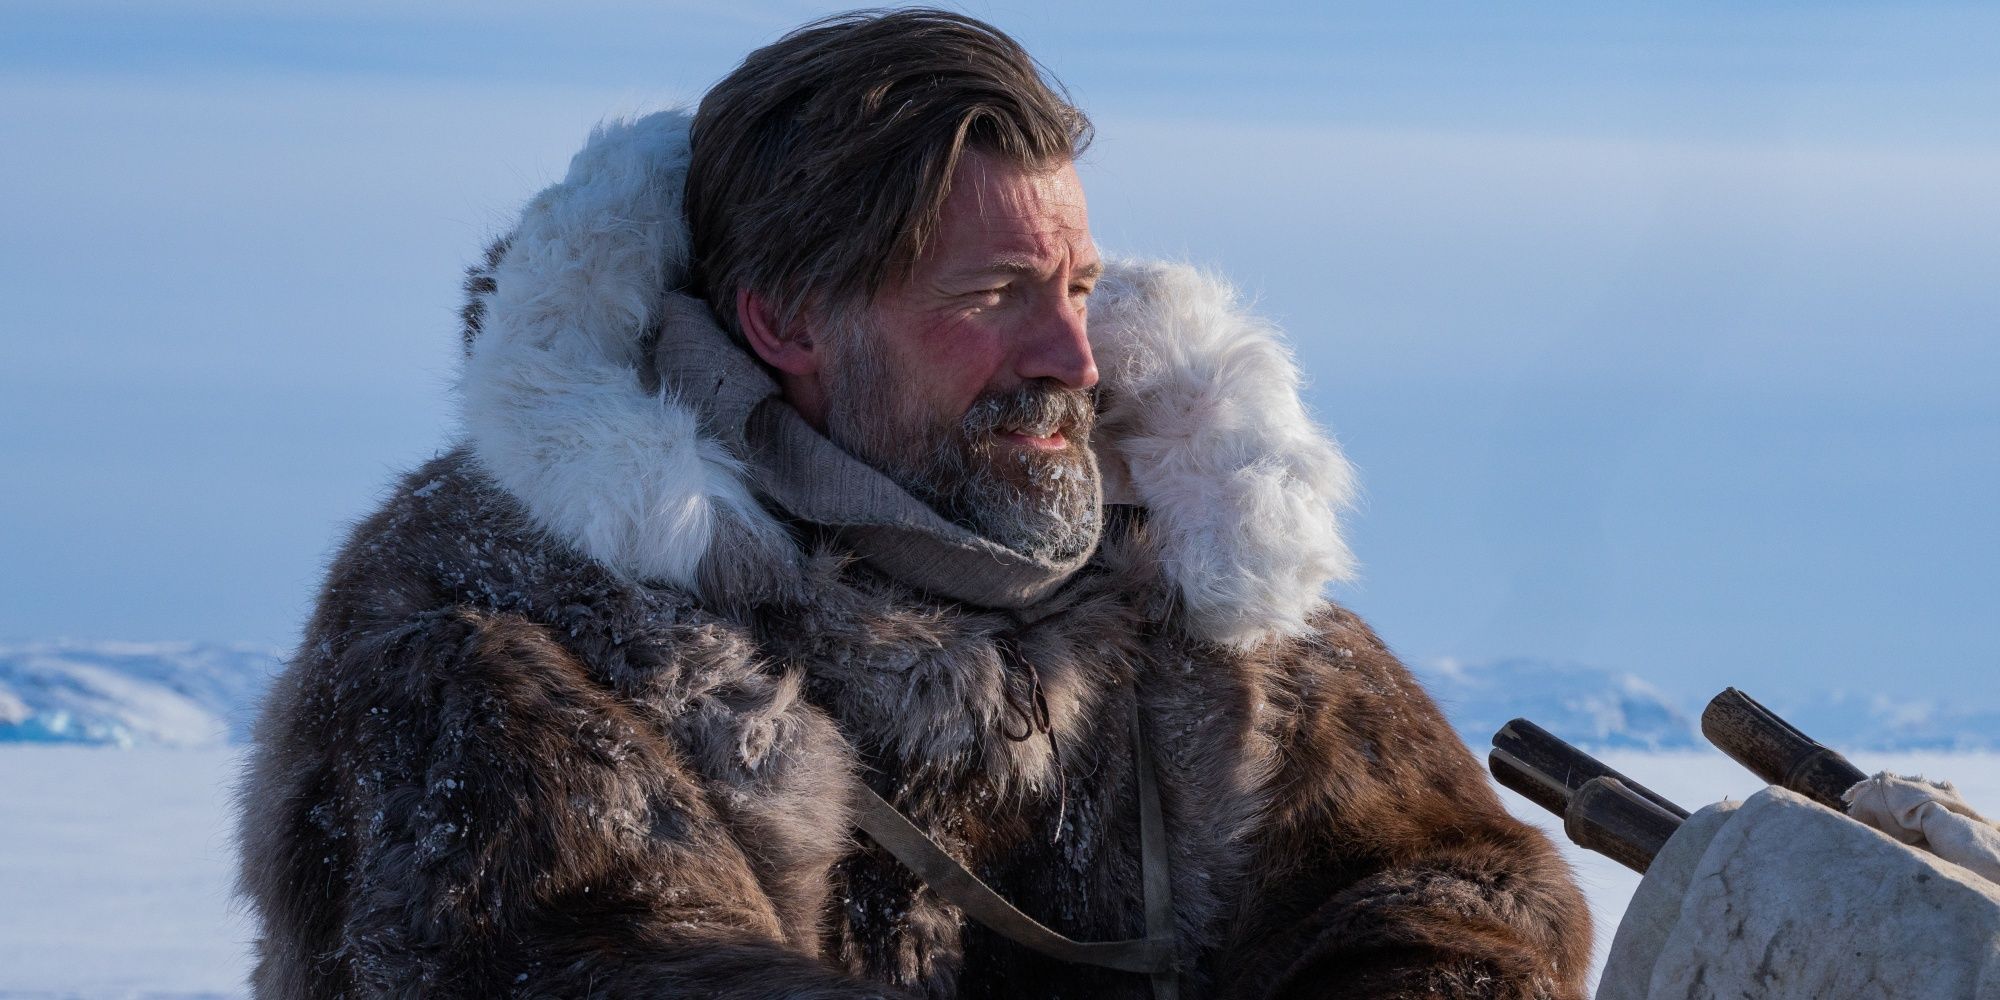 Against the Ice review – simple but sturdy Netflix survival drama, Action  and adventure films